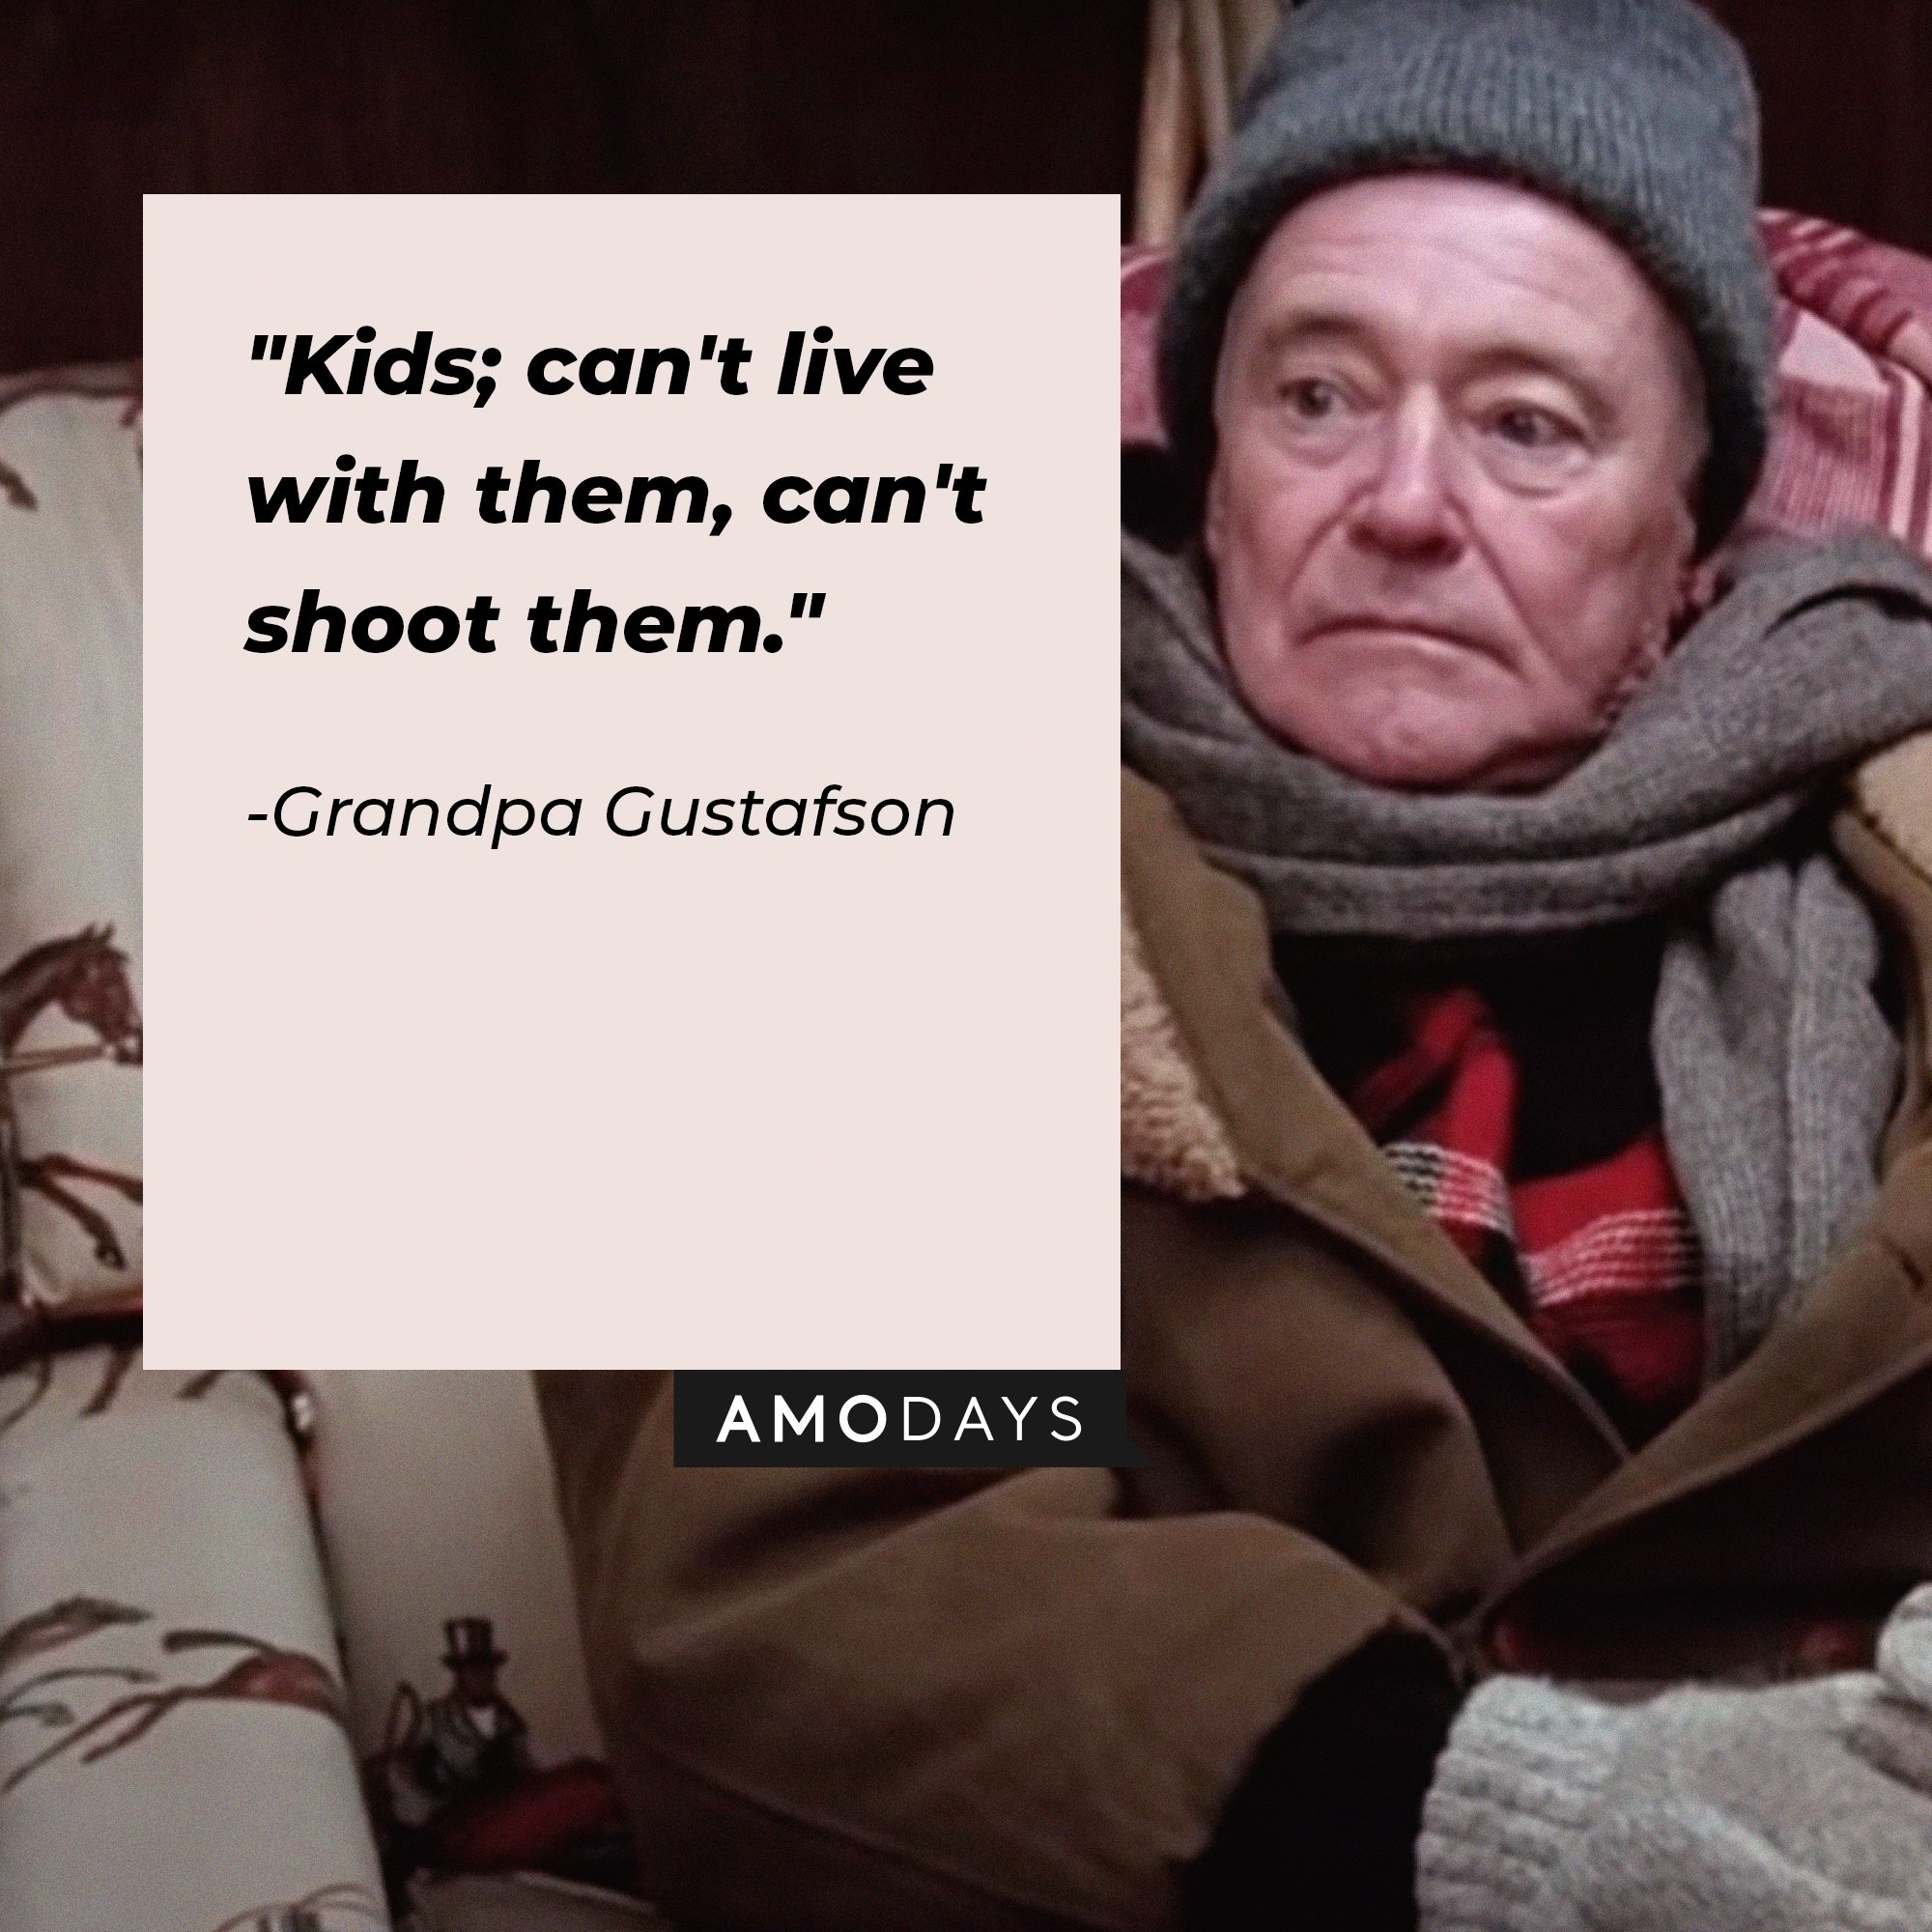 Grandpa Gustafson’s quote: "Kids; can't live with them, can't shoot them." | Image: AmoDays